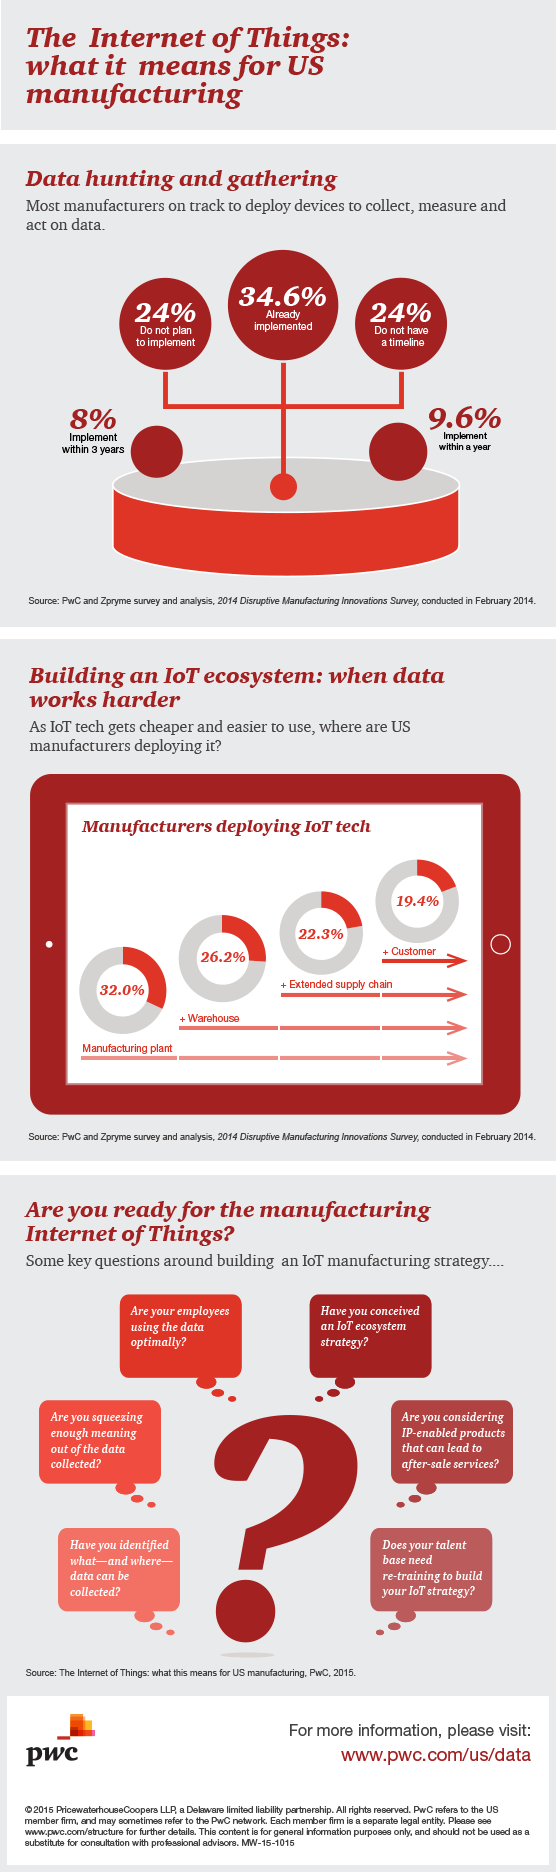 The Internet of Things and big data in manufacturing - source PwC